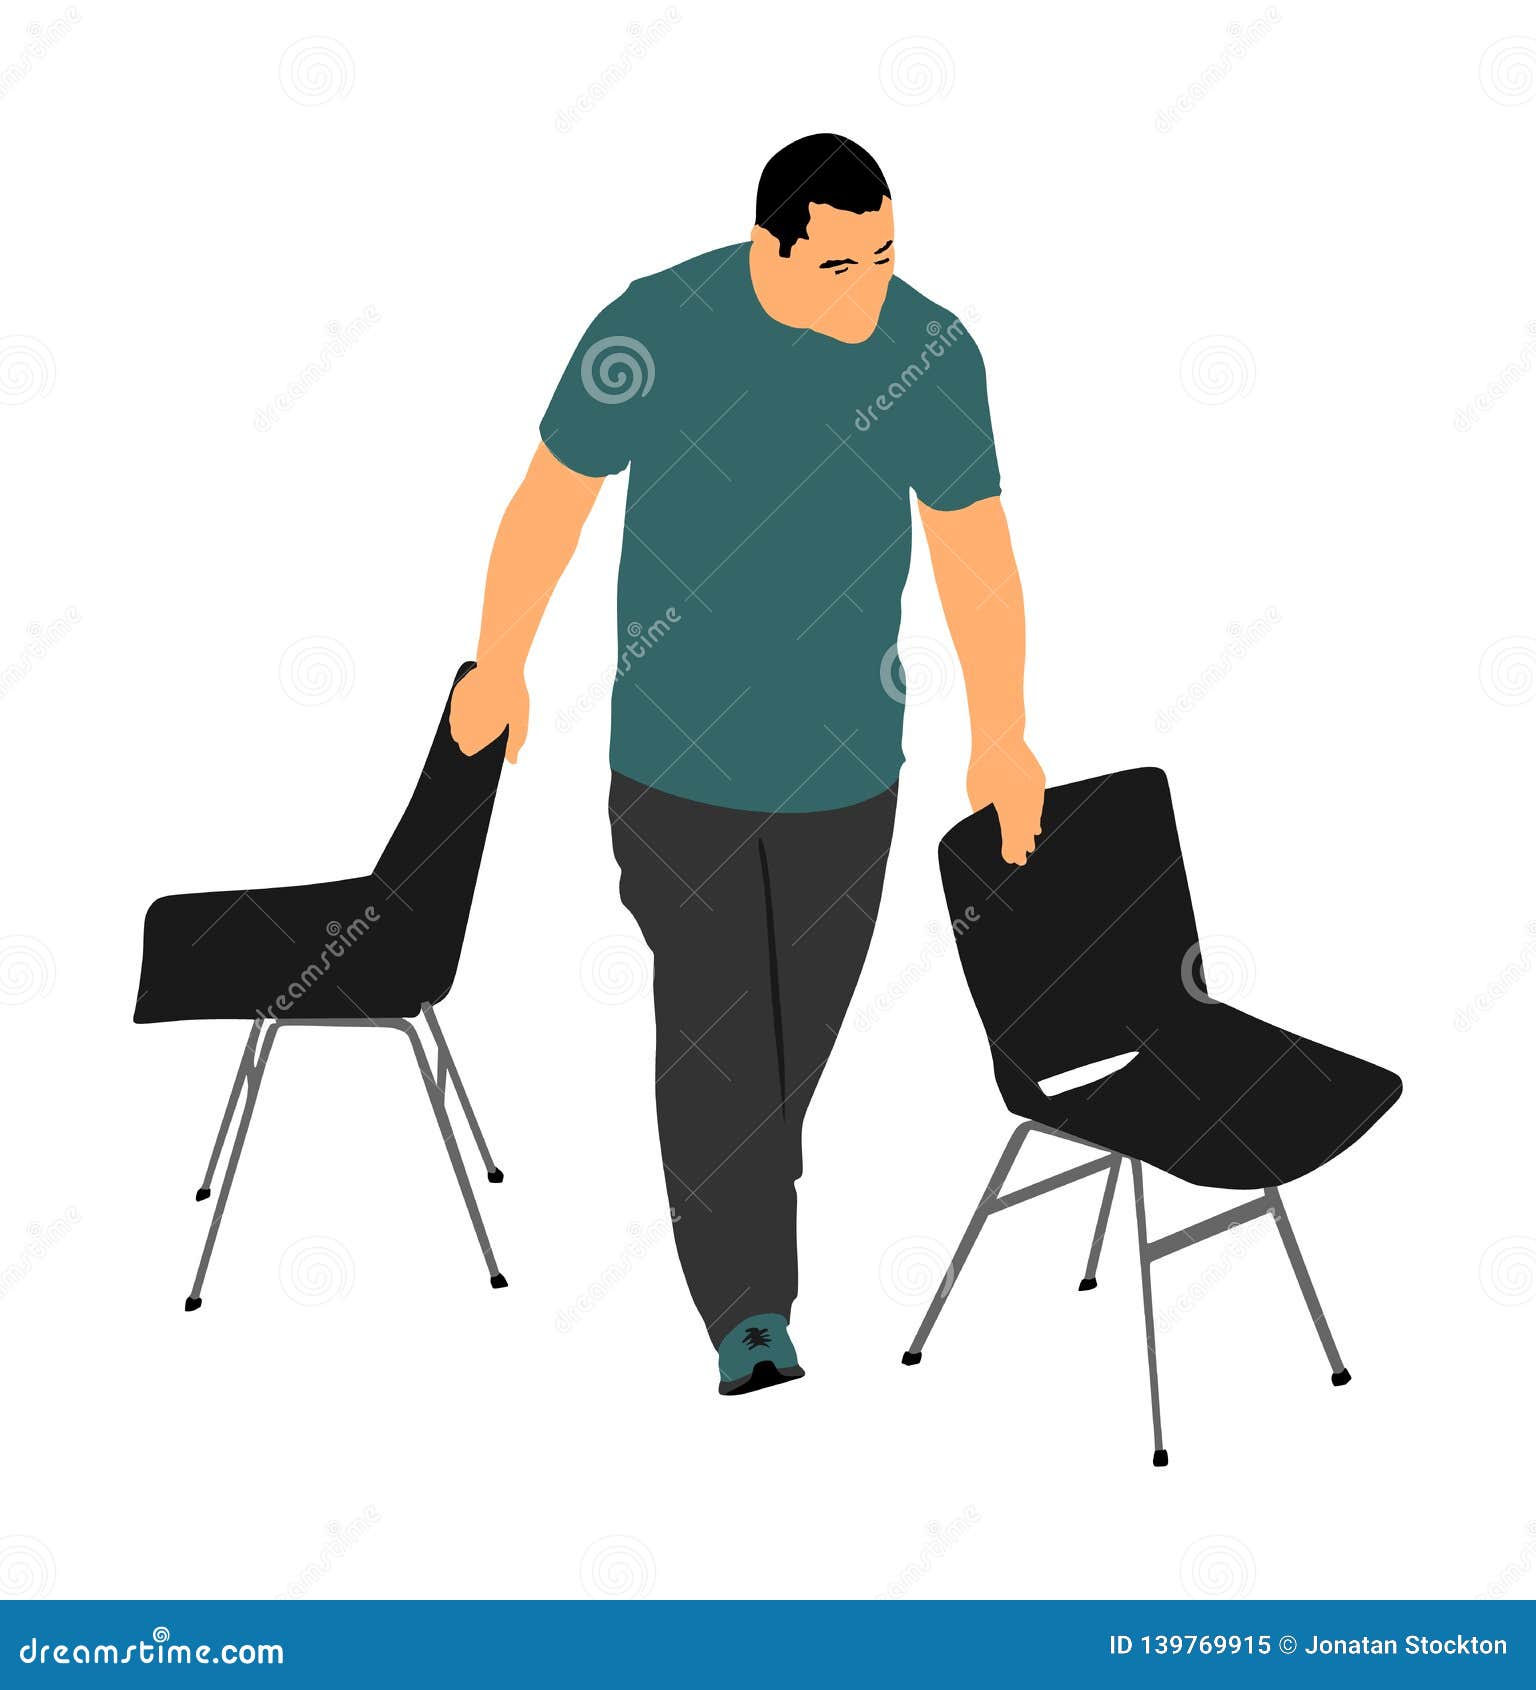 Delivery Service Moving Transport, Worker Carrying Chairs Illustration ...